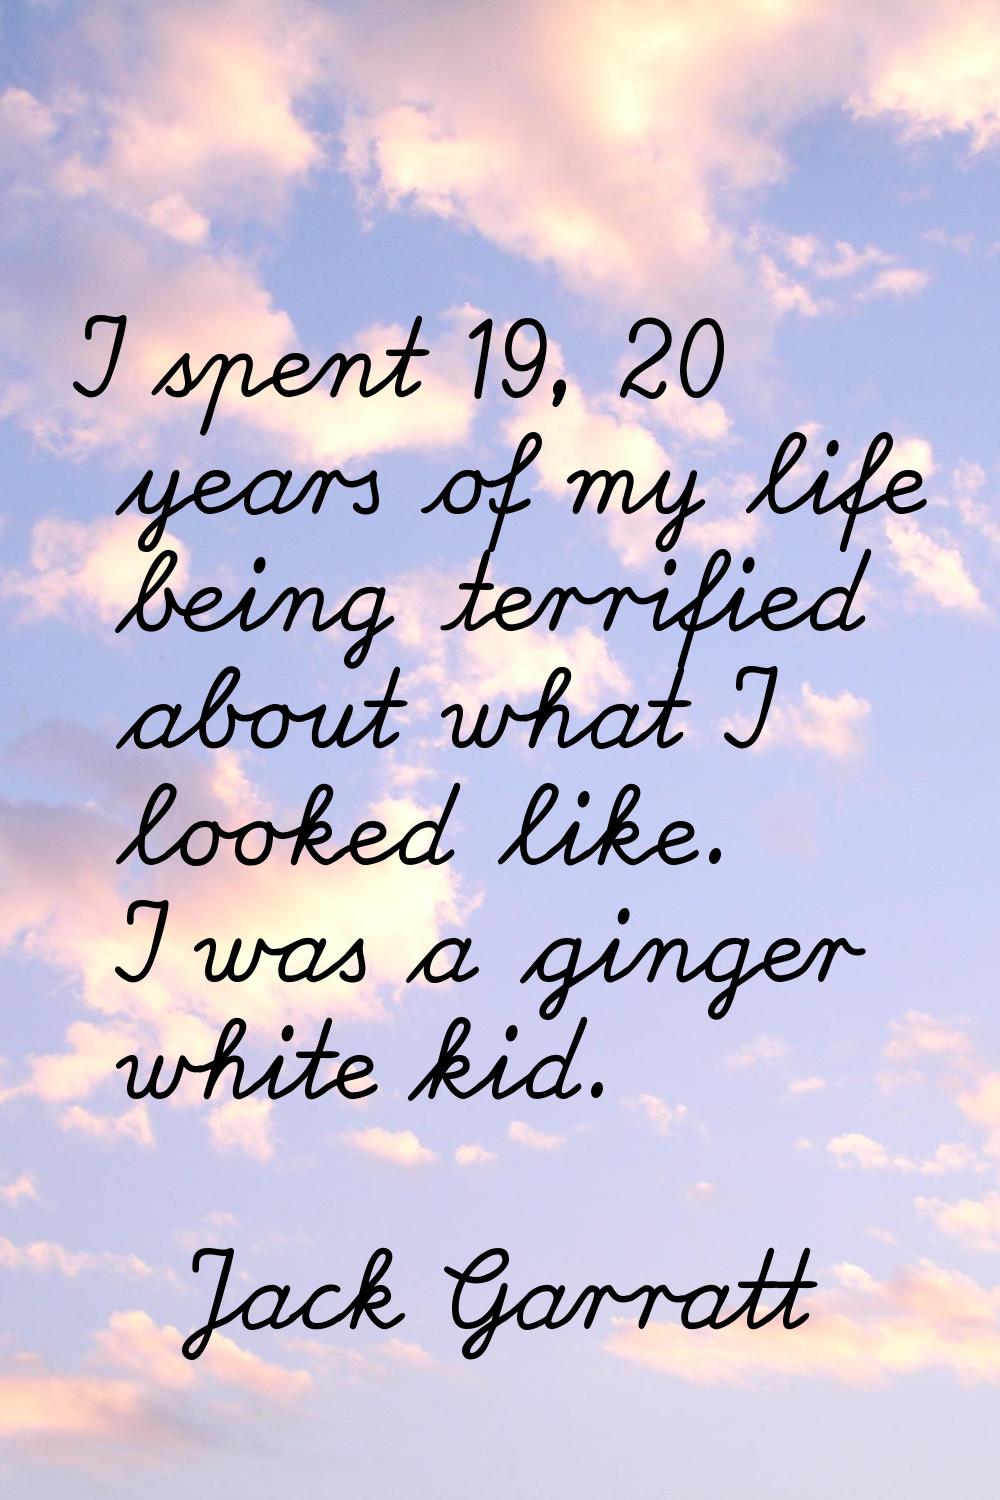 I spent 19, 20 years of my life being terrified about what I looked like. I was a ginger white kid.